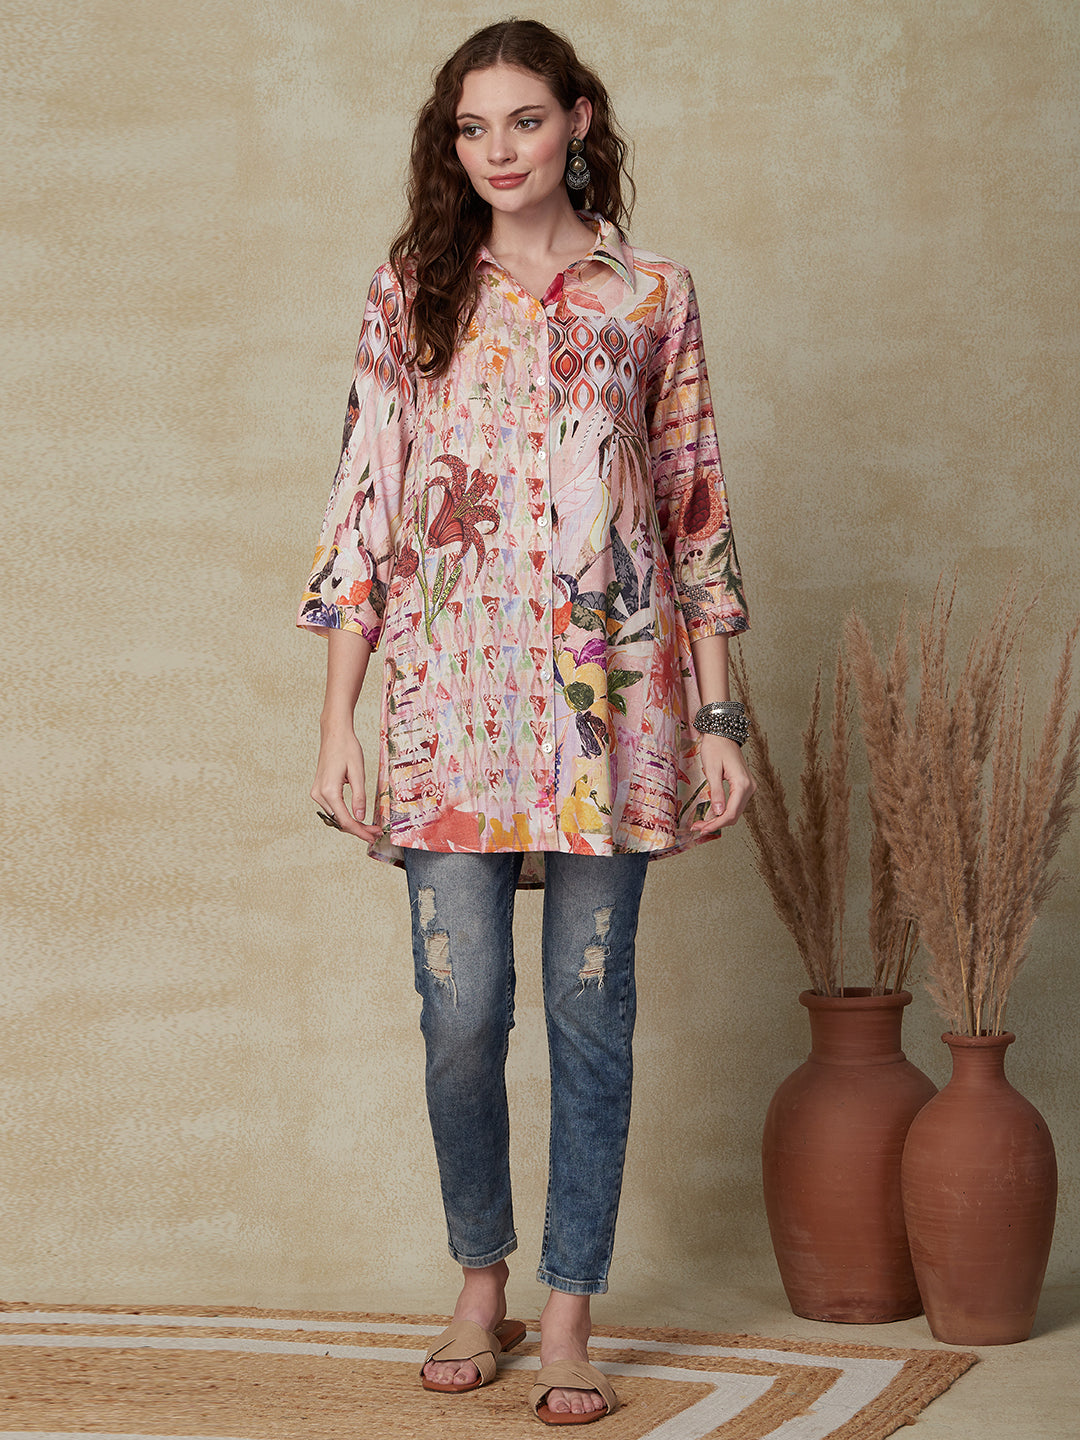 Floral & Abstract Printed Mother-of-Pearl Buttoned Shirt - Multi